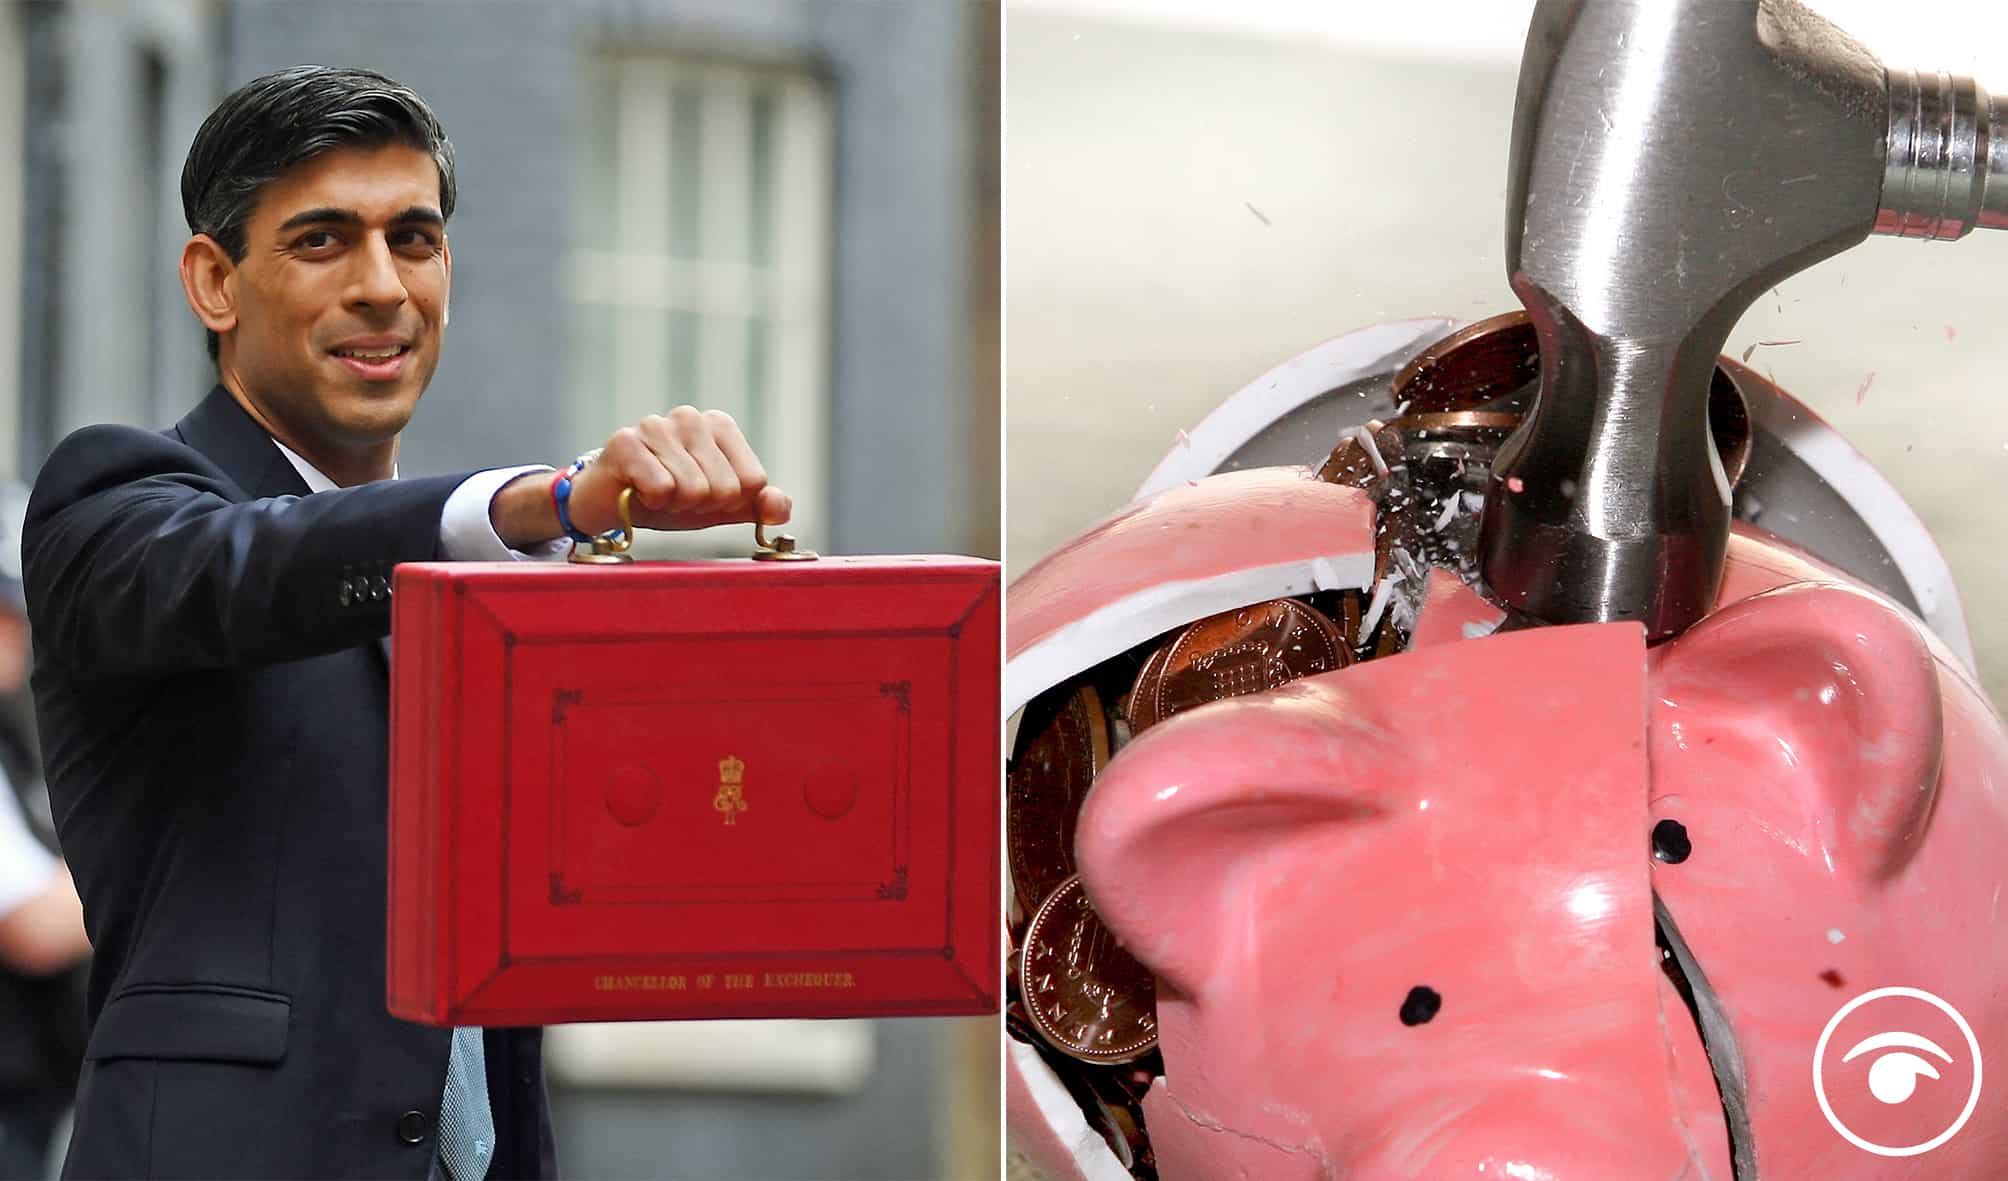 Public services face cuts that could ‘feel like the austerity of the 2010s’